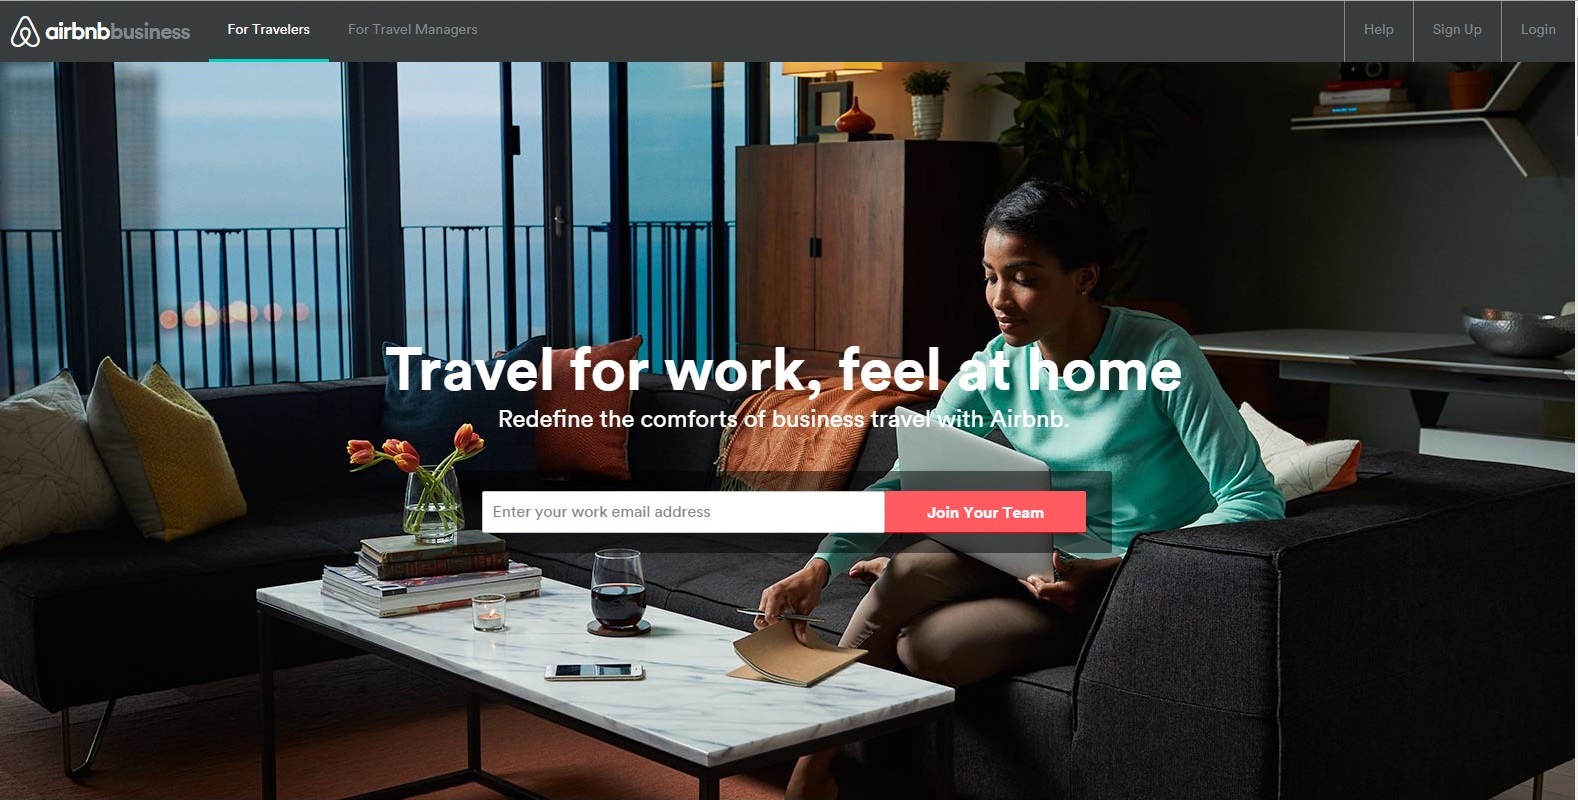 airbnb business travel